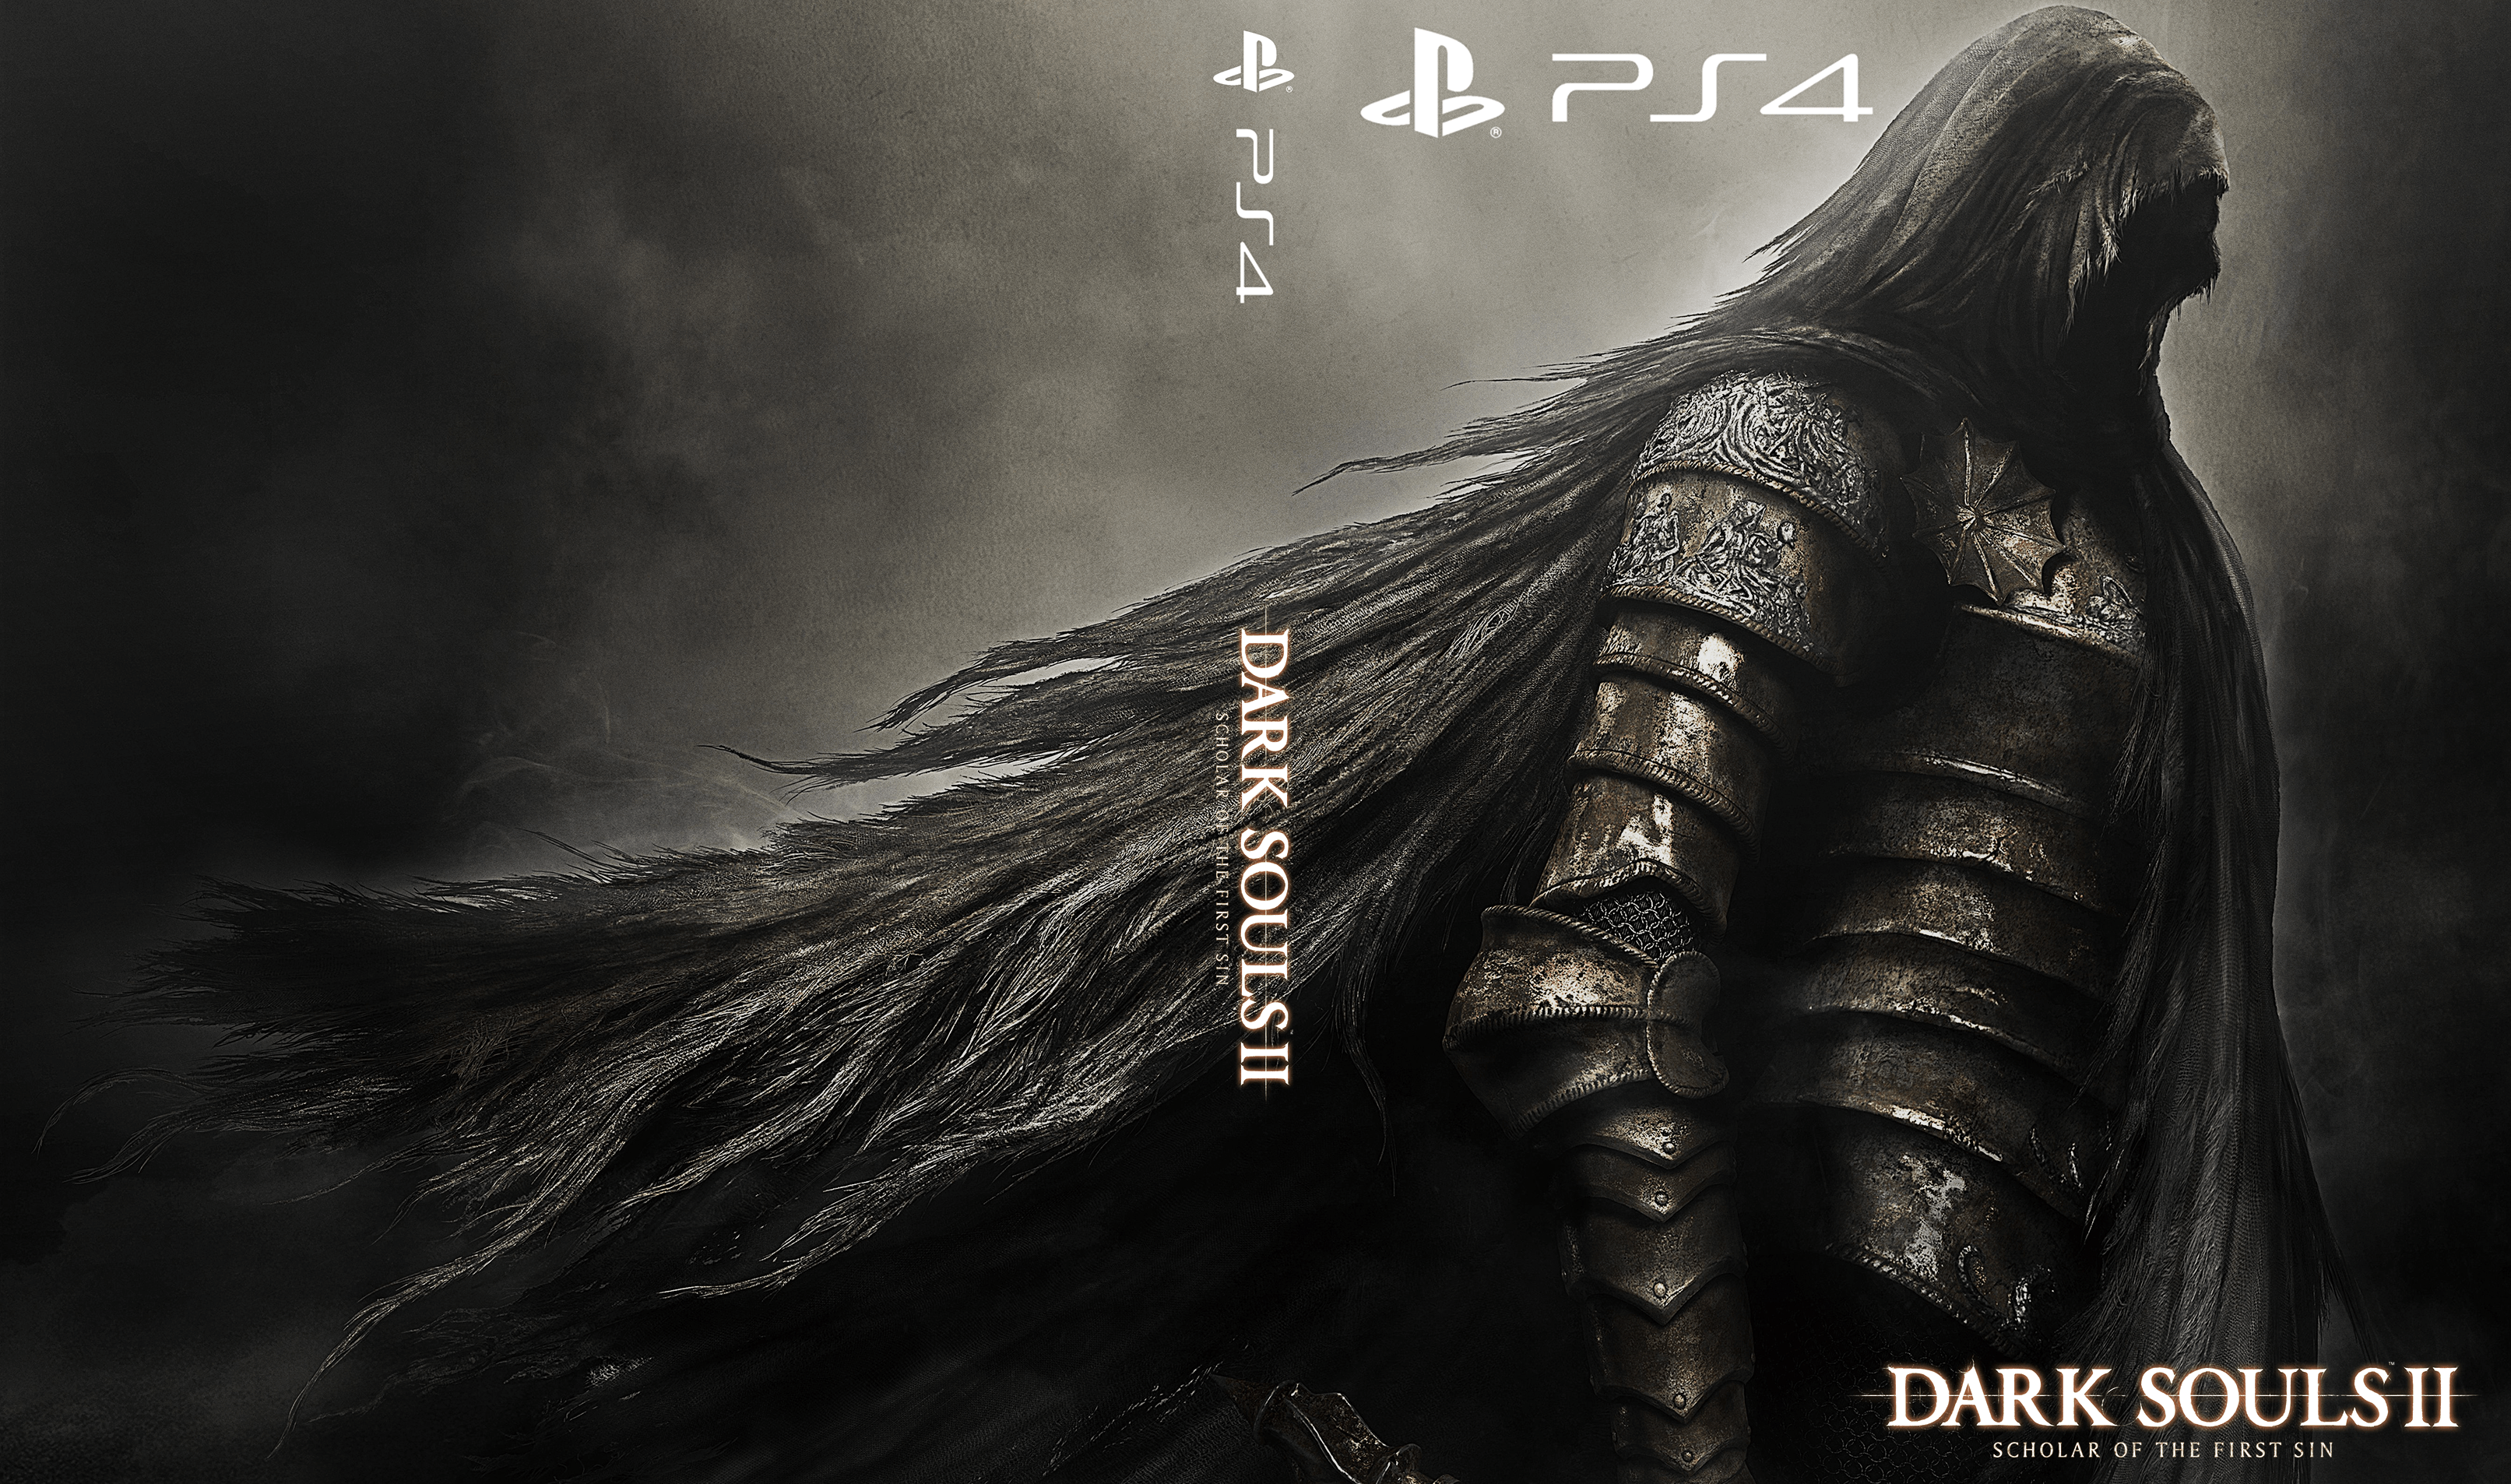 Dark Souls 2 Scholar of the First Sin box cover